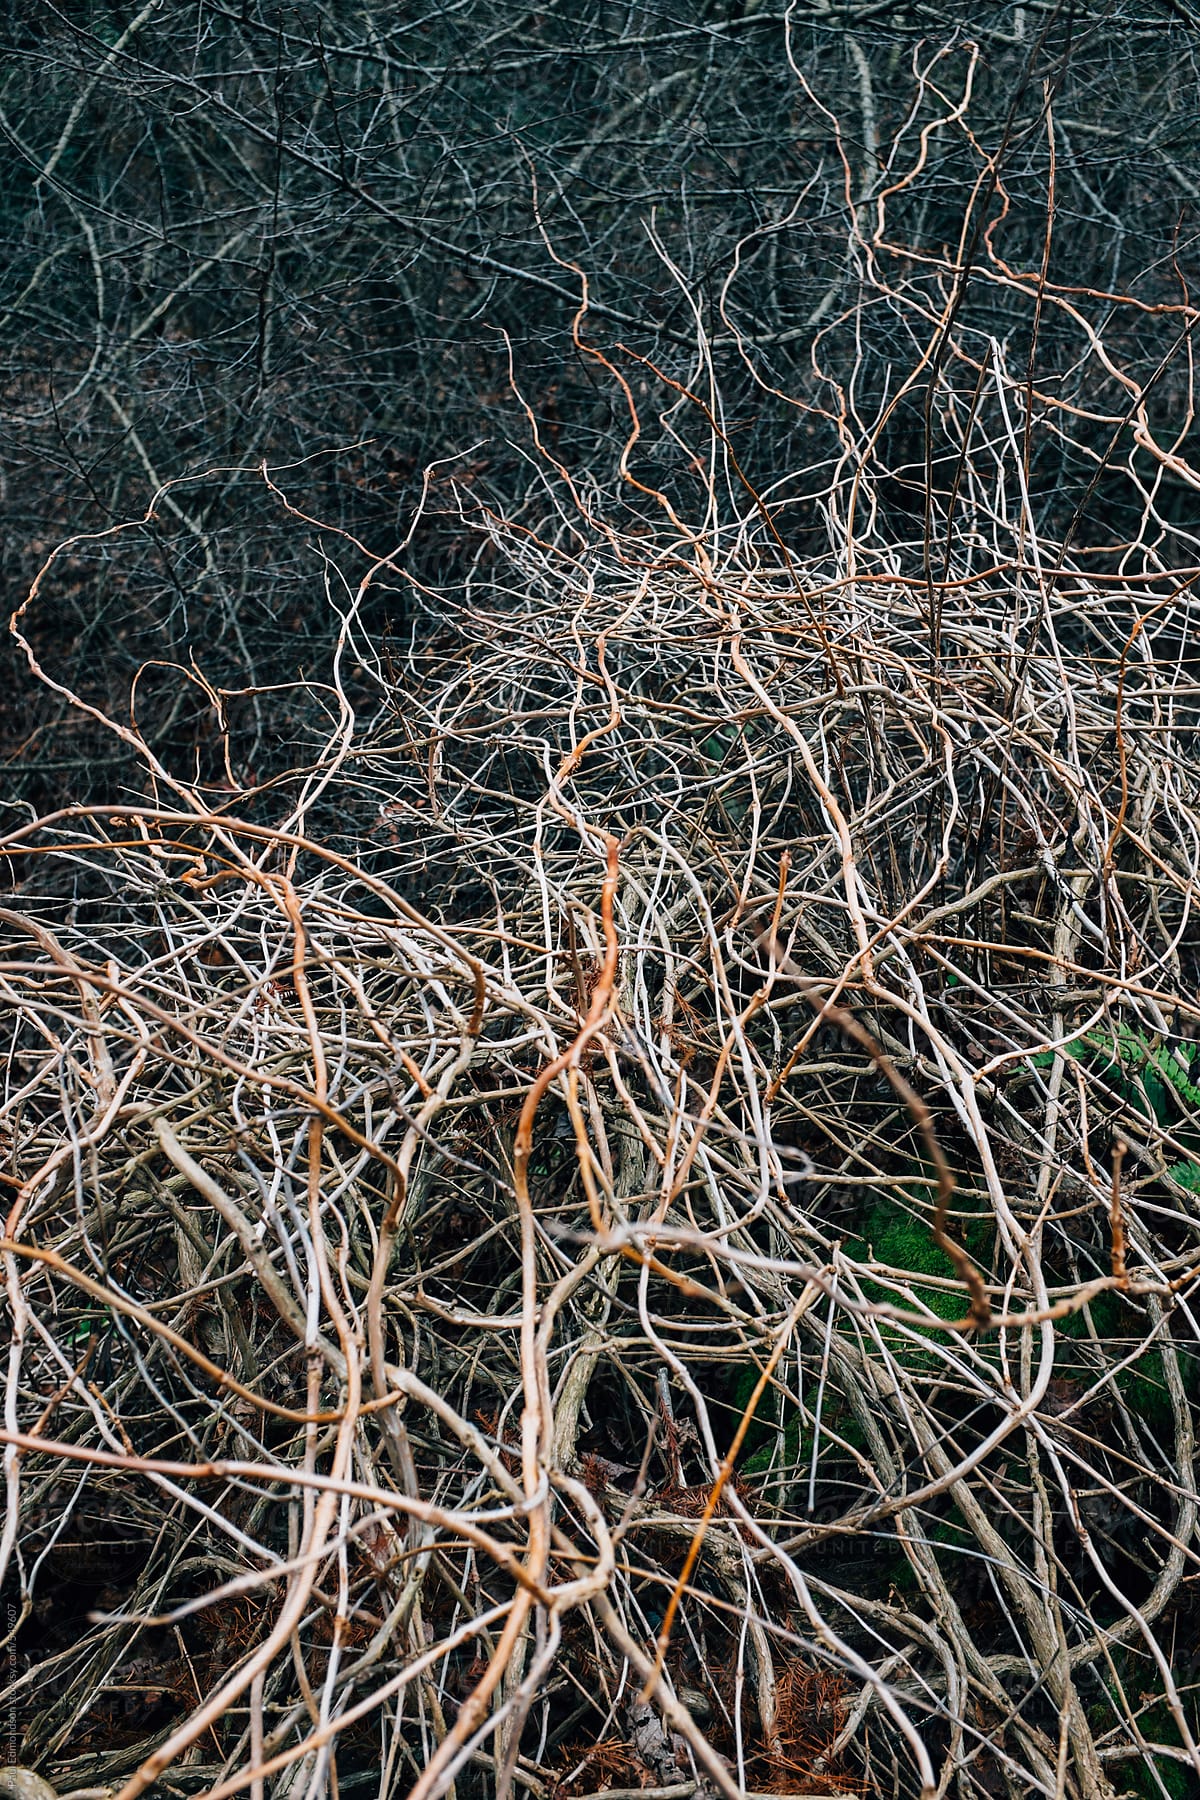 A tangle of branches and vines in forest